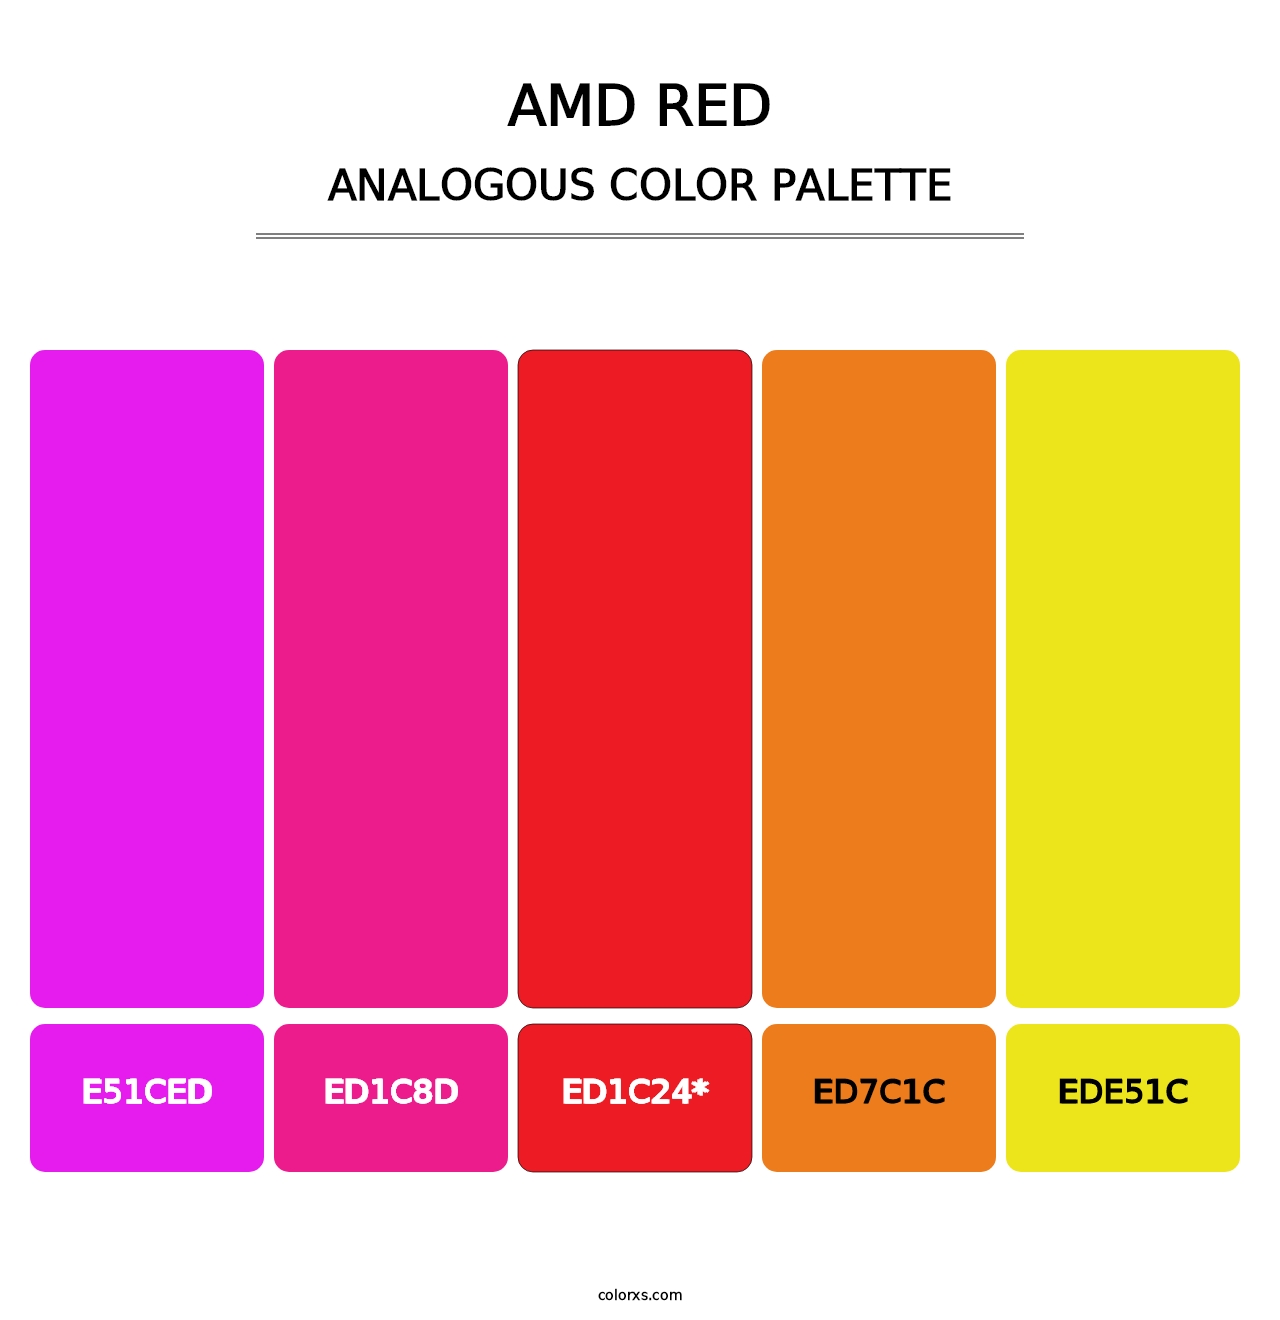 AMD Red - Analogous Color Palette